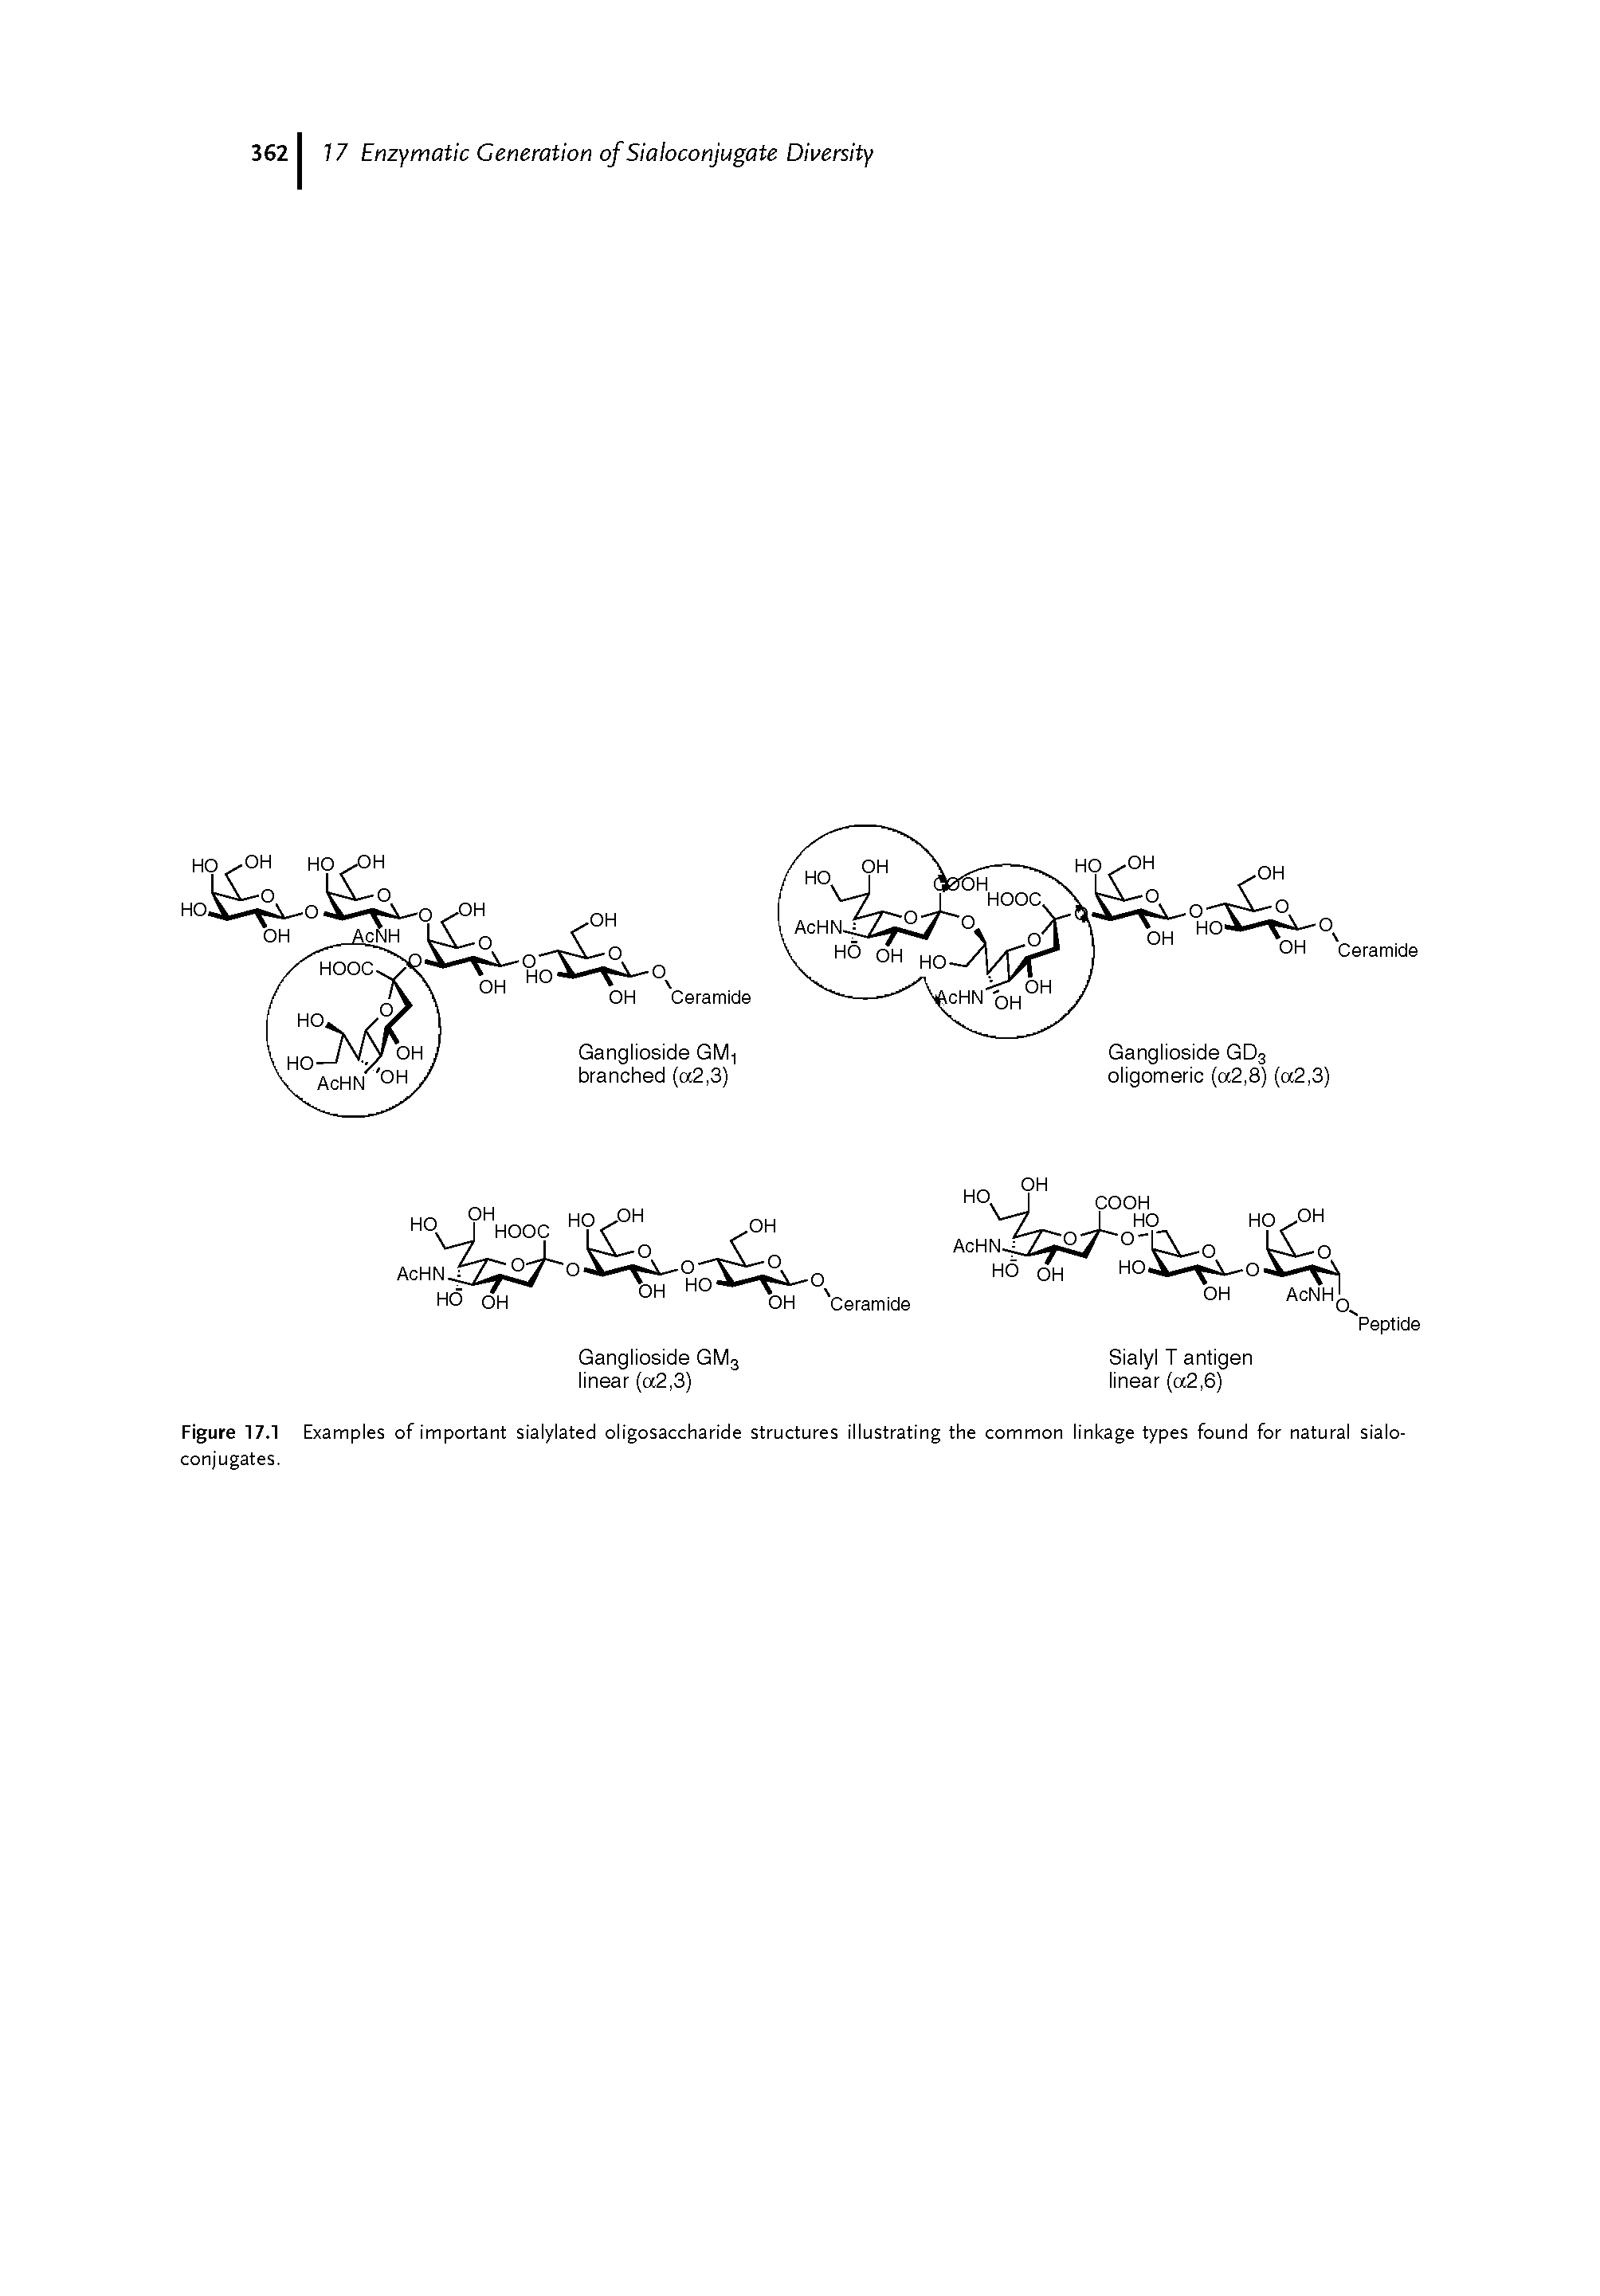 Figure 17.1 Examples of important sialylated oligosaccharide structures illustrating the common linkage types found for natural sialo-conjugates-...